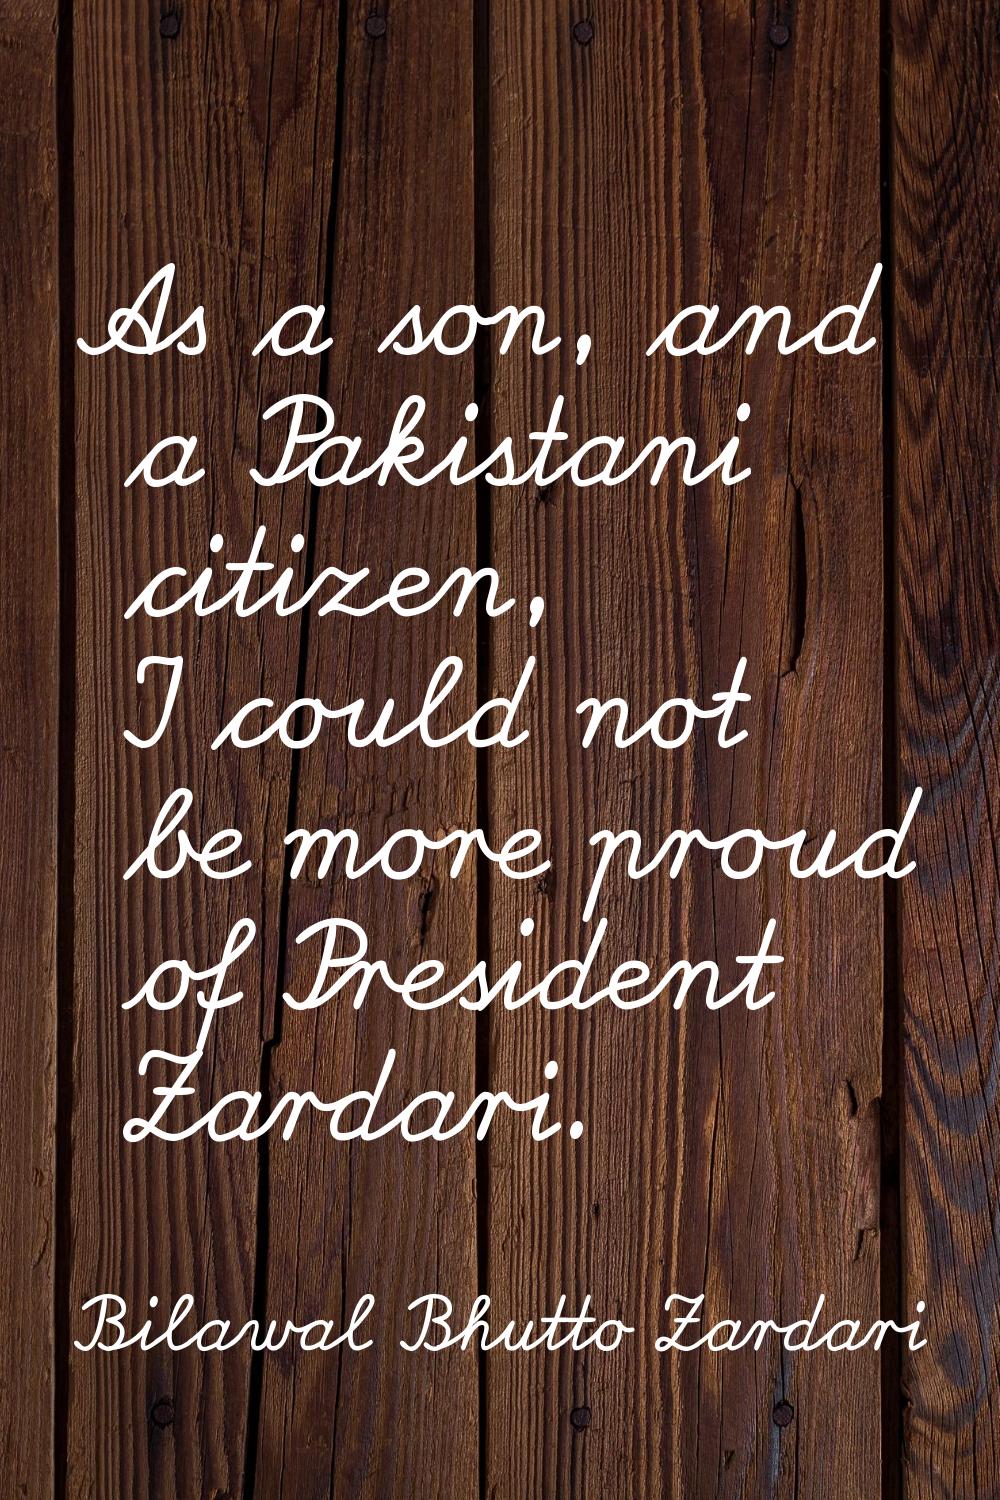 As a son, and a Pakistani citizen, I could not be more proud of President Zardari.